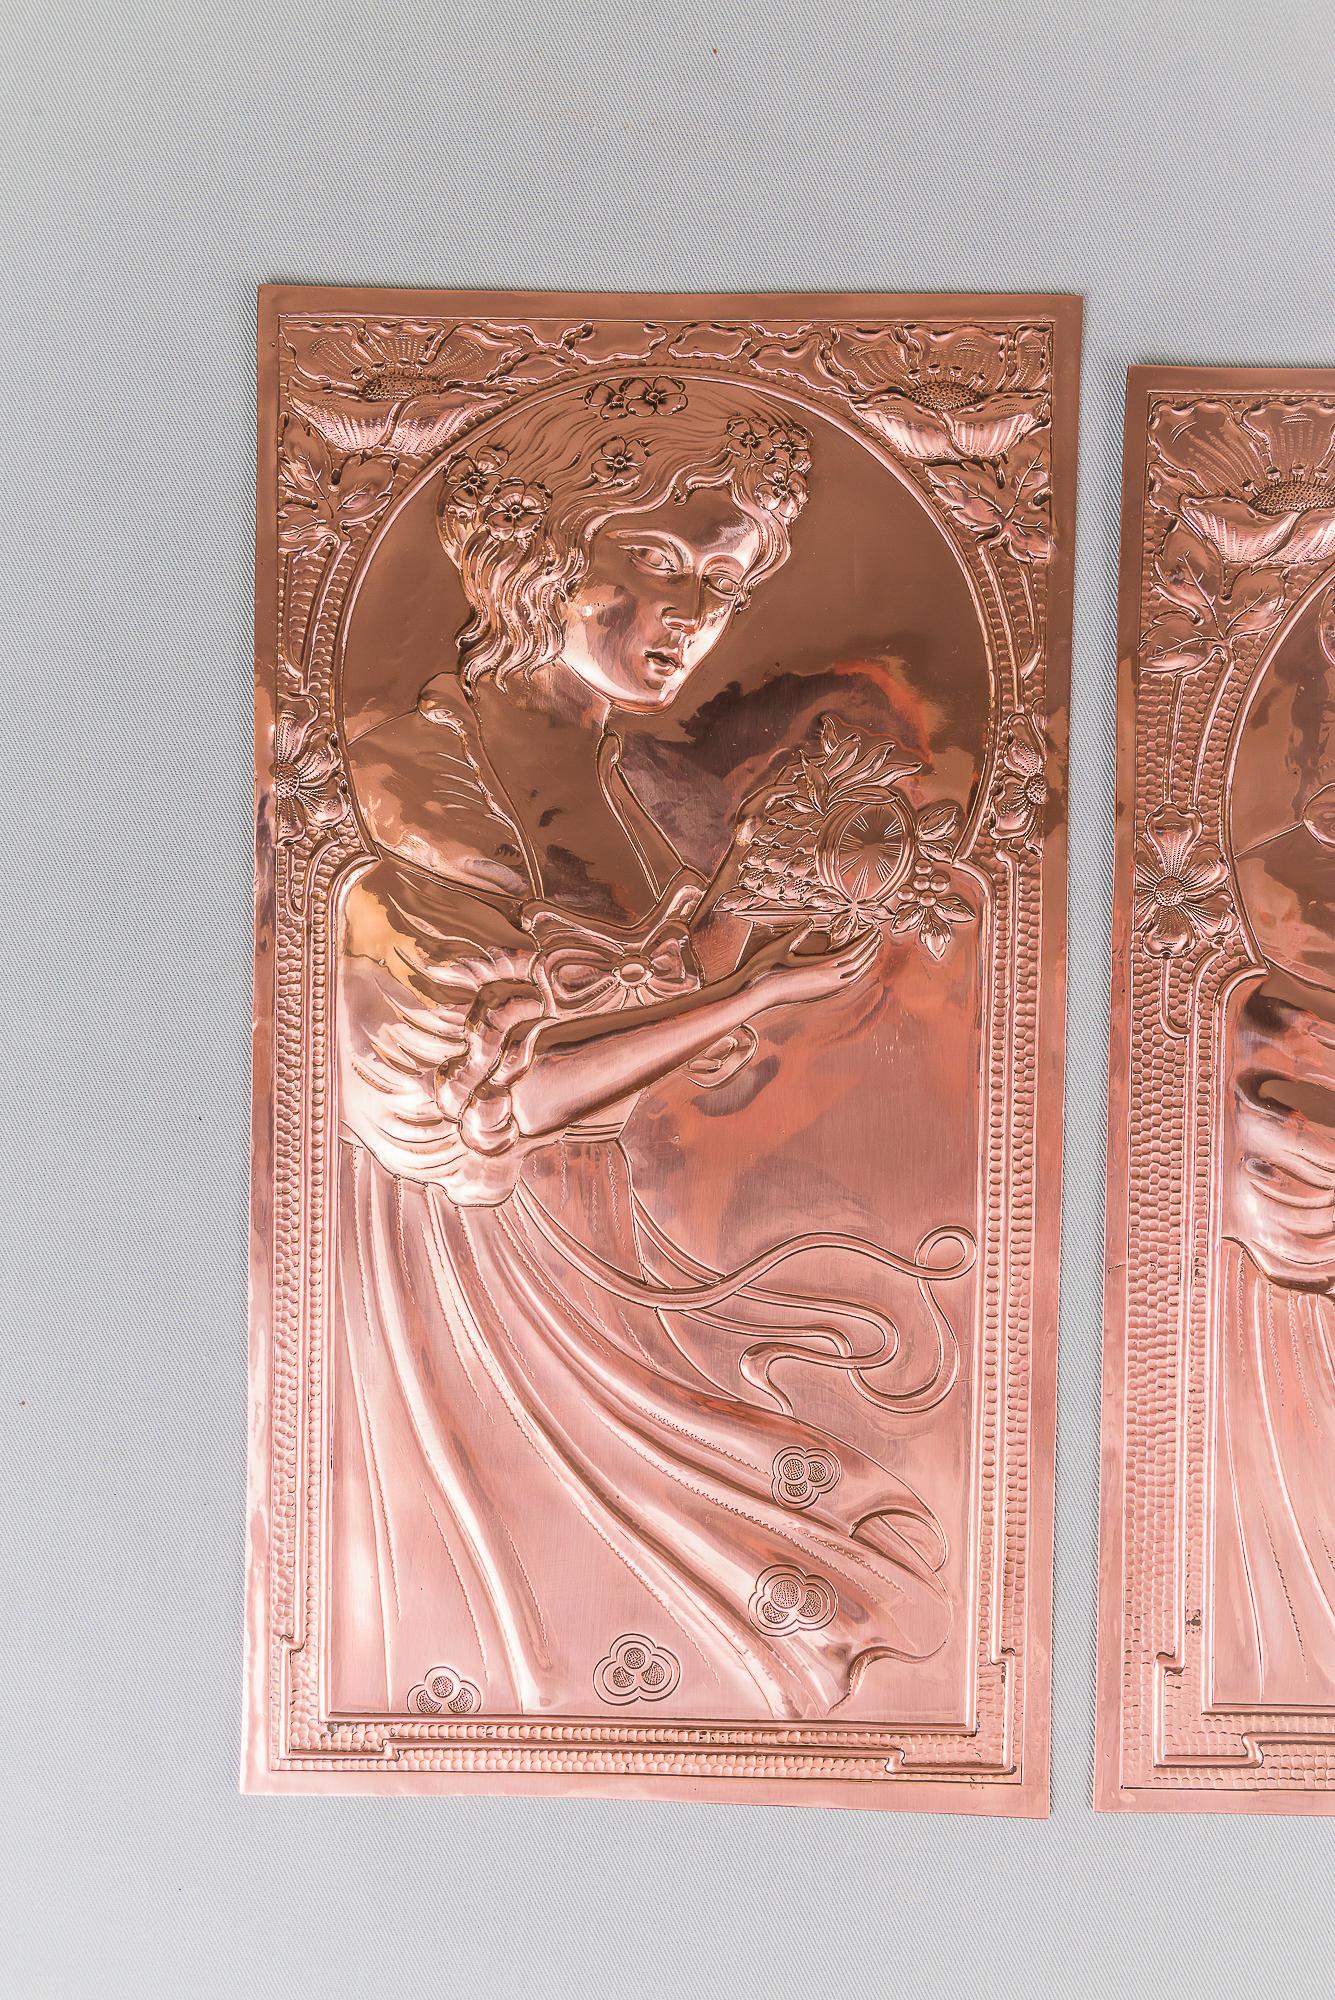 Four Jugendstil copper reliefs, circa 1907s
Polished and stove enameled
Priced and sell per piece
The bigger ones are: 31cm x 16.5cm x 2cm
The smaller ones are: 30cm x 18cm x 2cm.